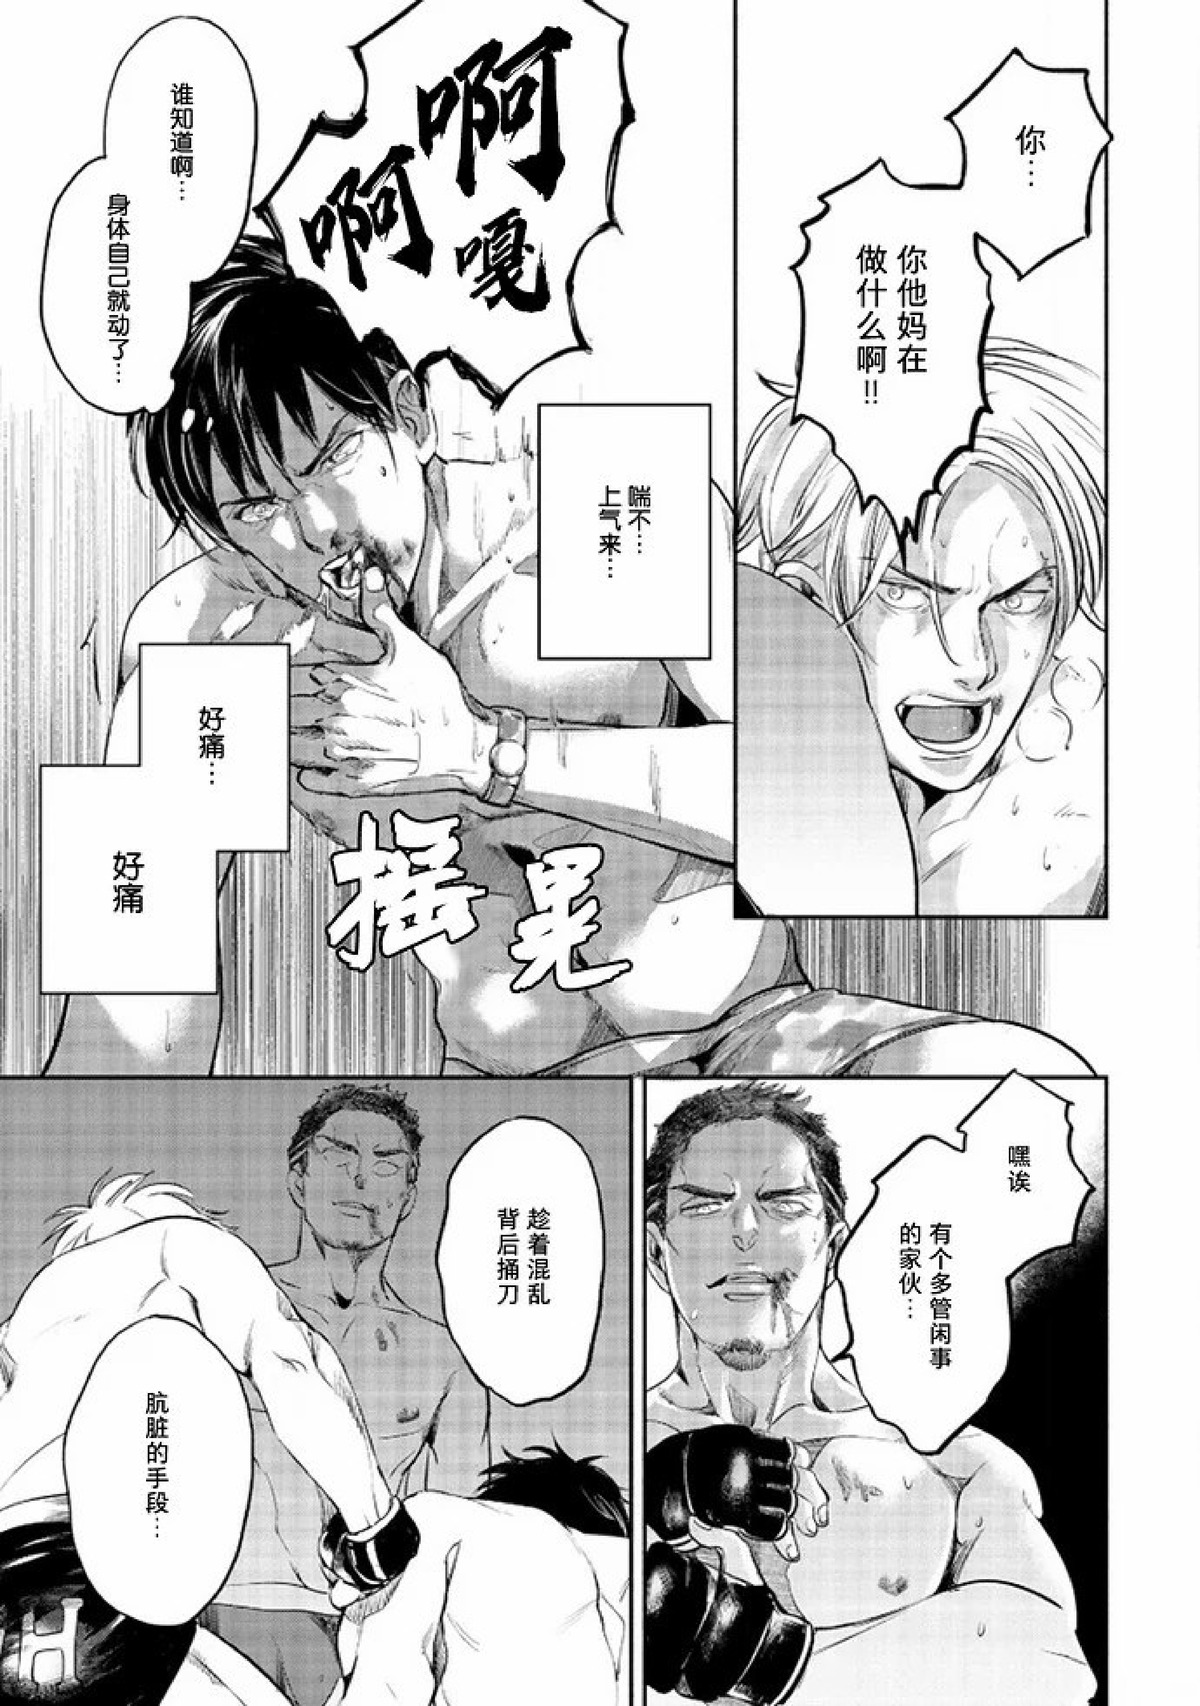 【Two sides of the same coin[腐漫]】漫画-（上卷01-02）章节漫画下拉式图片-69.jpg